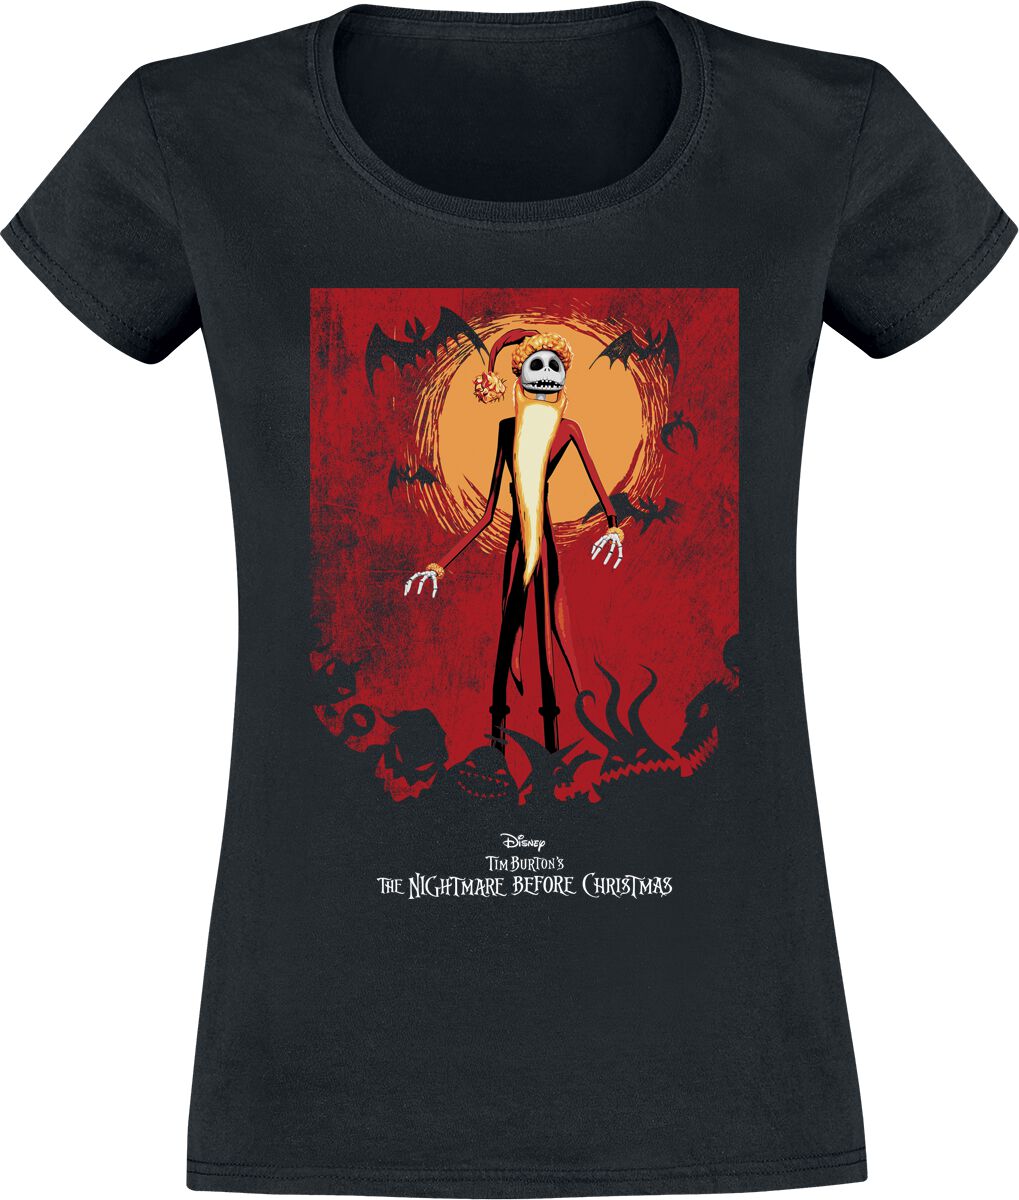 Image of T-Shirt Disney di Nightmare Before Christmas - Scary Christmas Jack - S a M - Donna - nero